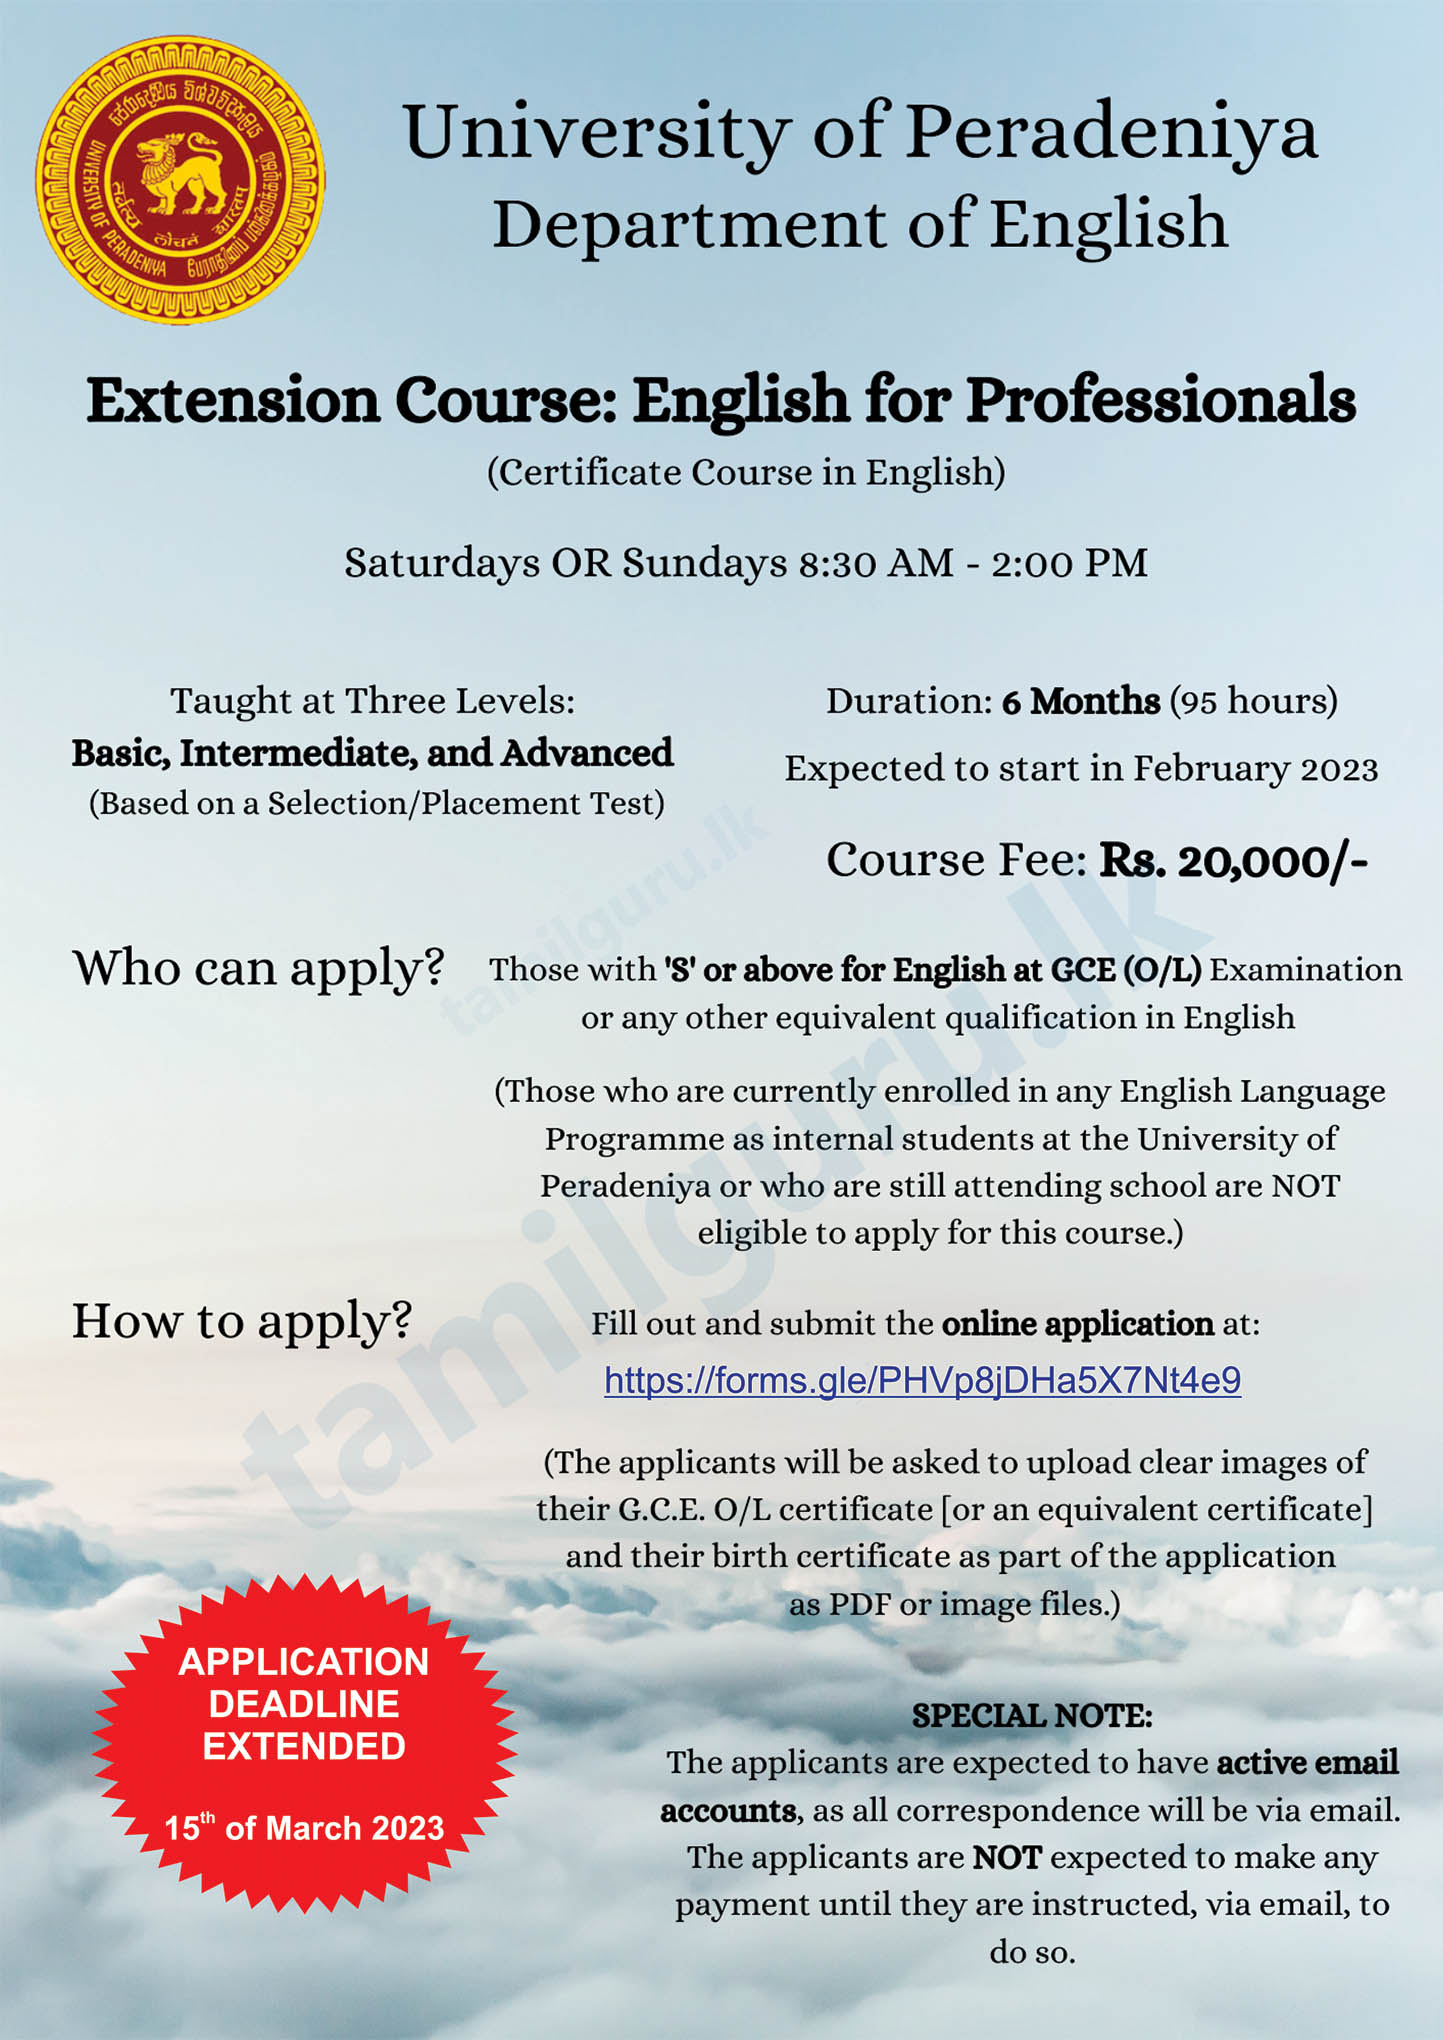 Application for Certificate Course in English for Professionals (2023) - University of Peradeniya